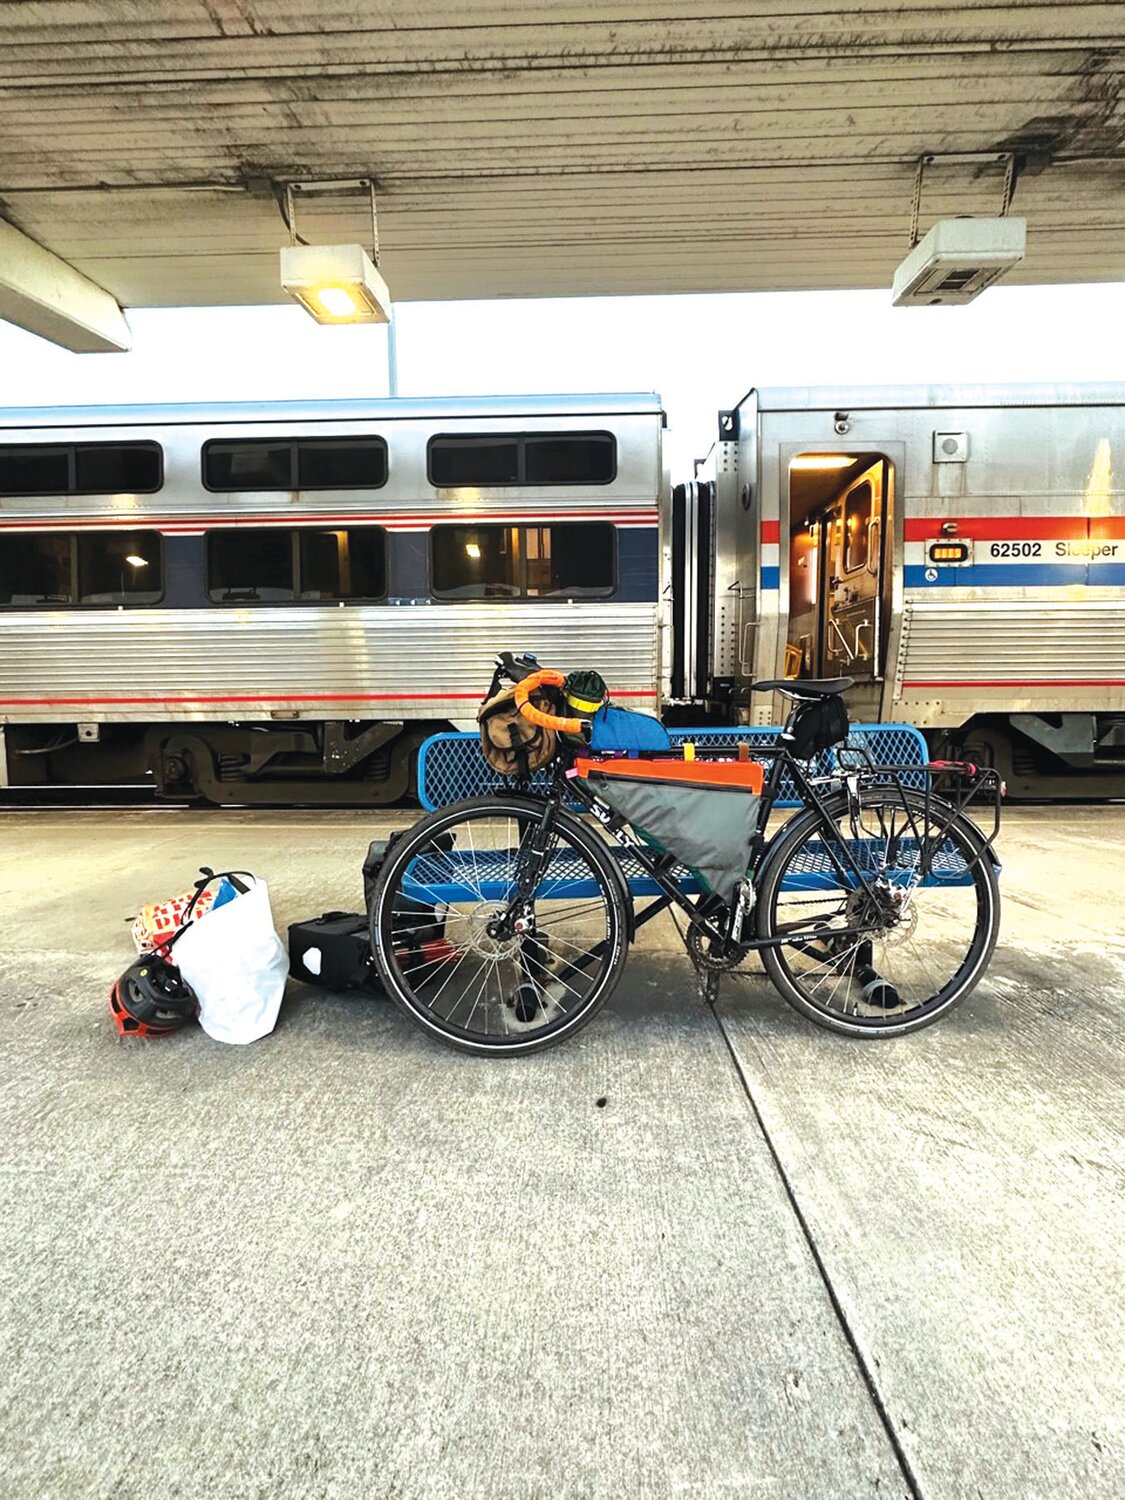 Spencer McCullough’s bicycling journey to America’s national parks began at an Amtrak station in Miami Fla.